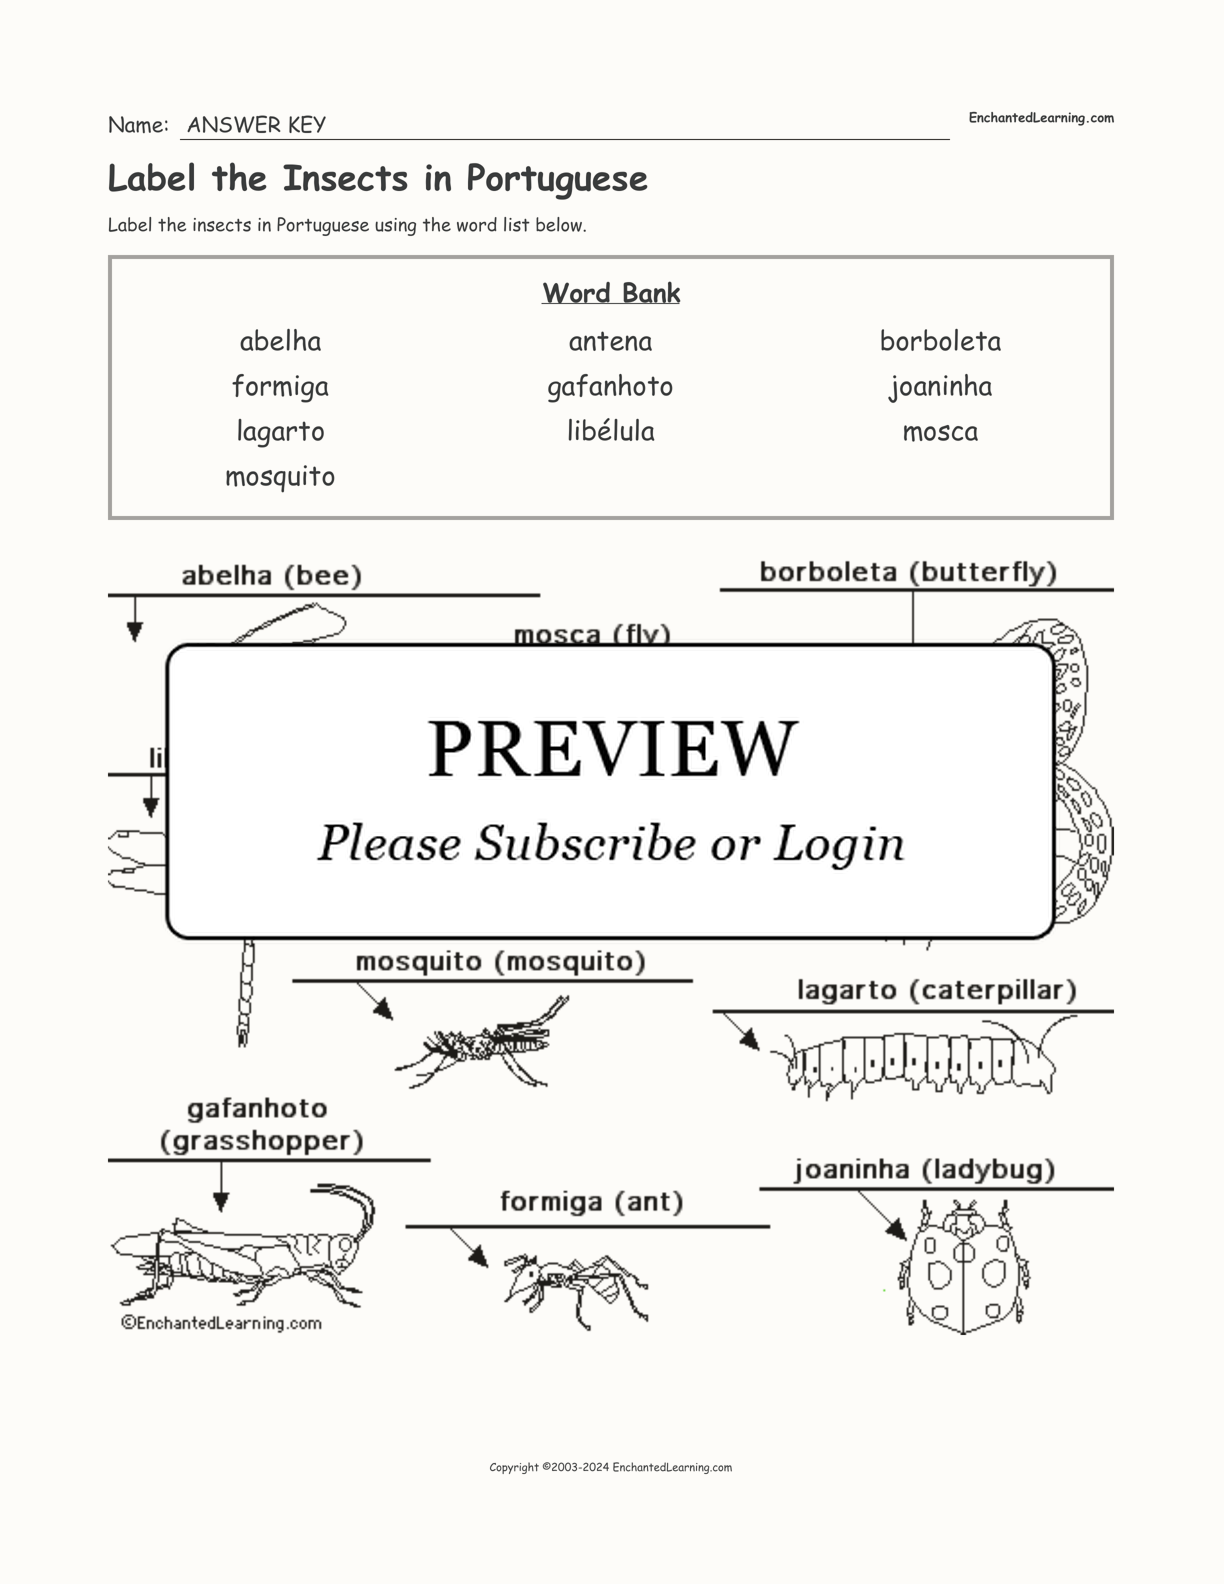 Label the Insects in Portuguese interactive worksheet page 2